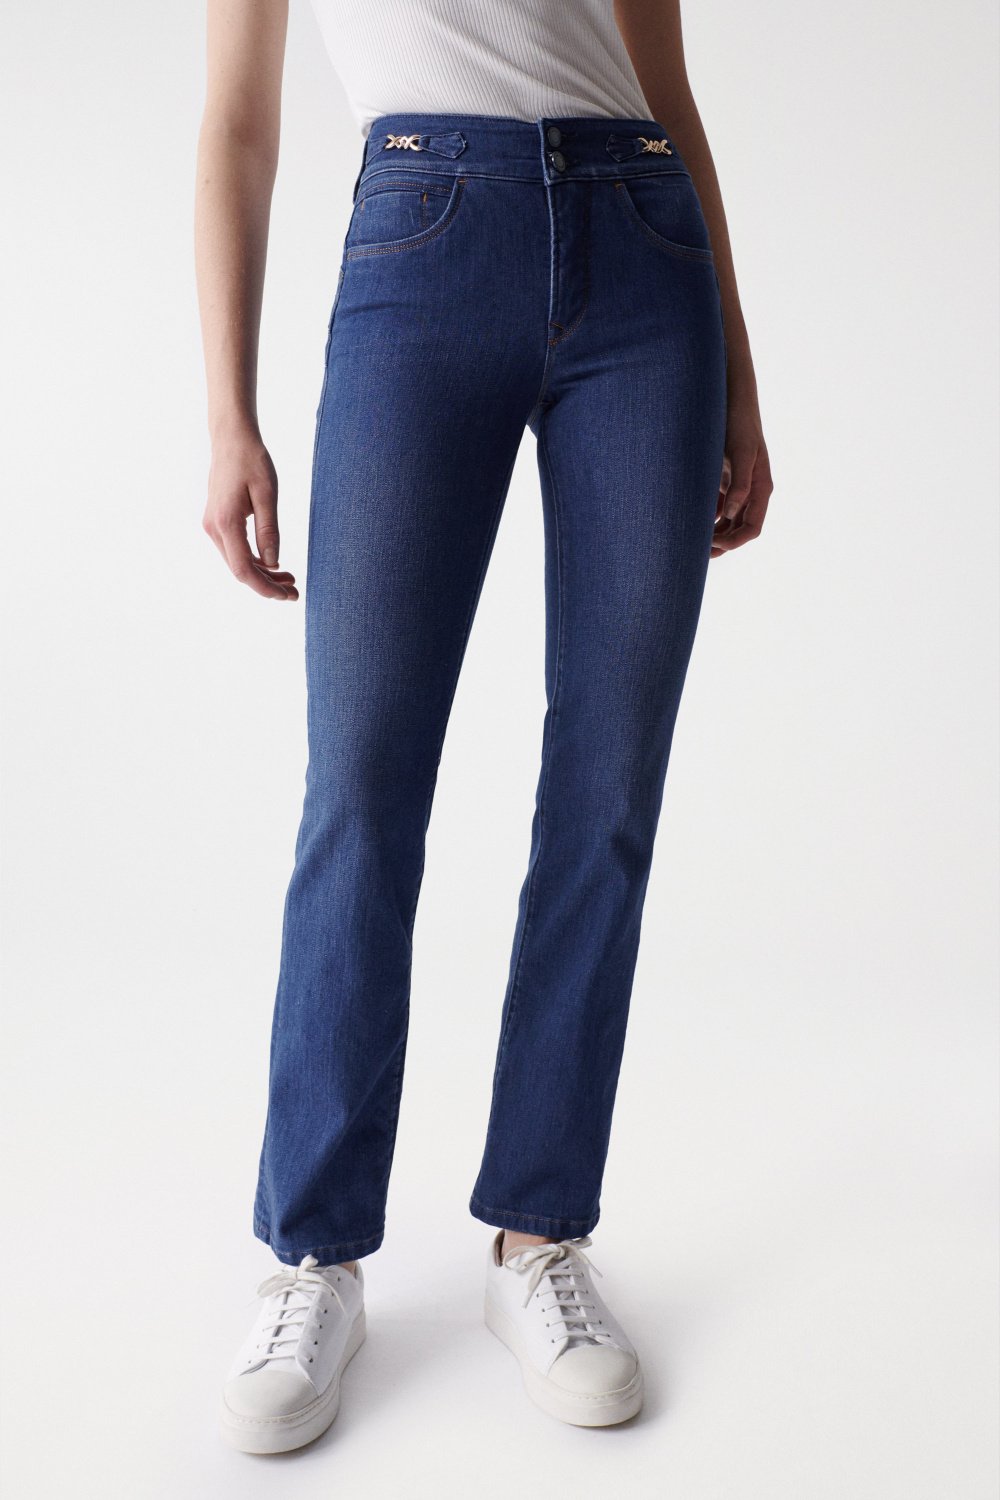 Push In Secret Jeans with metallic detail on the belt - Salsa